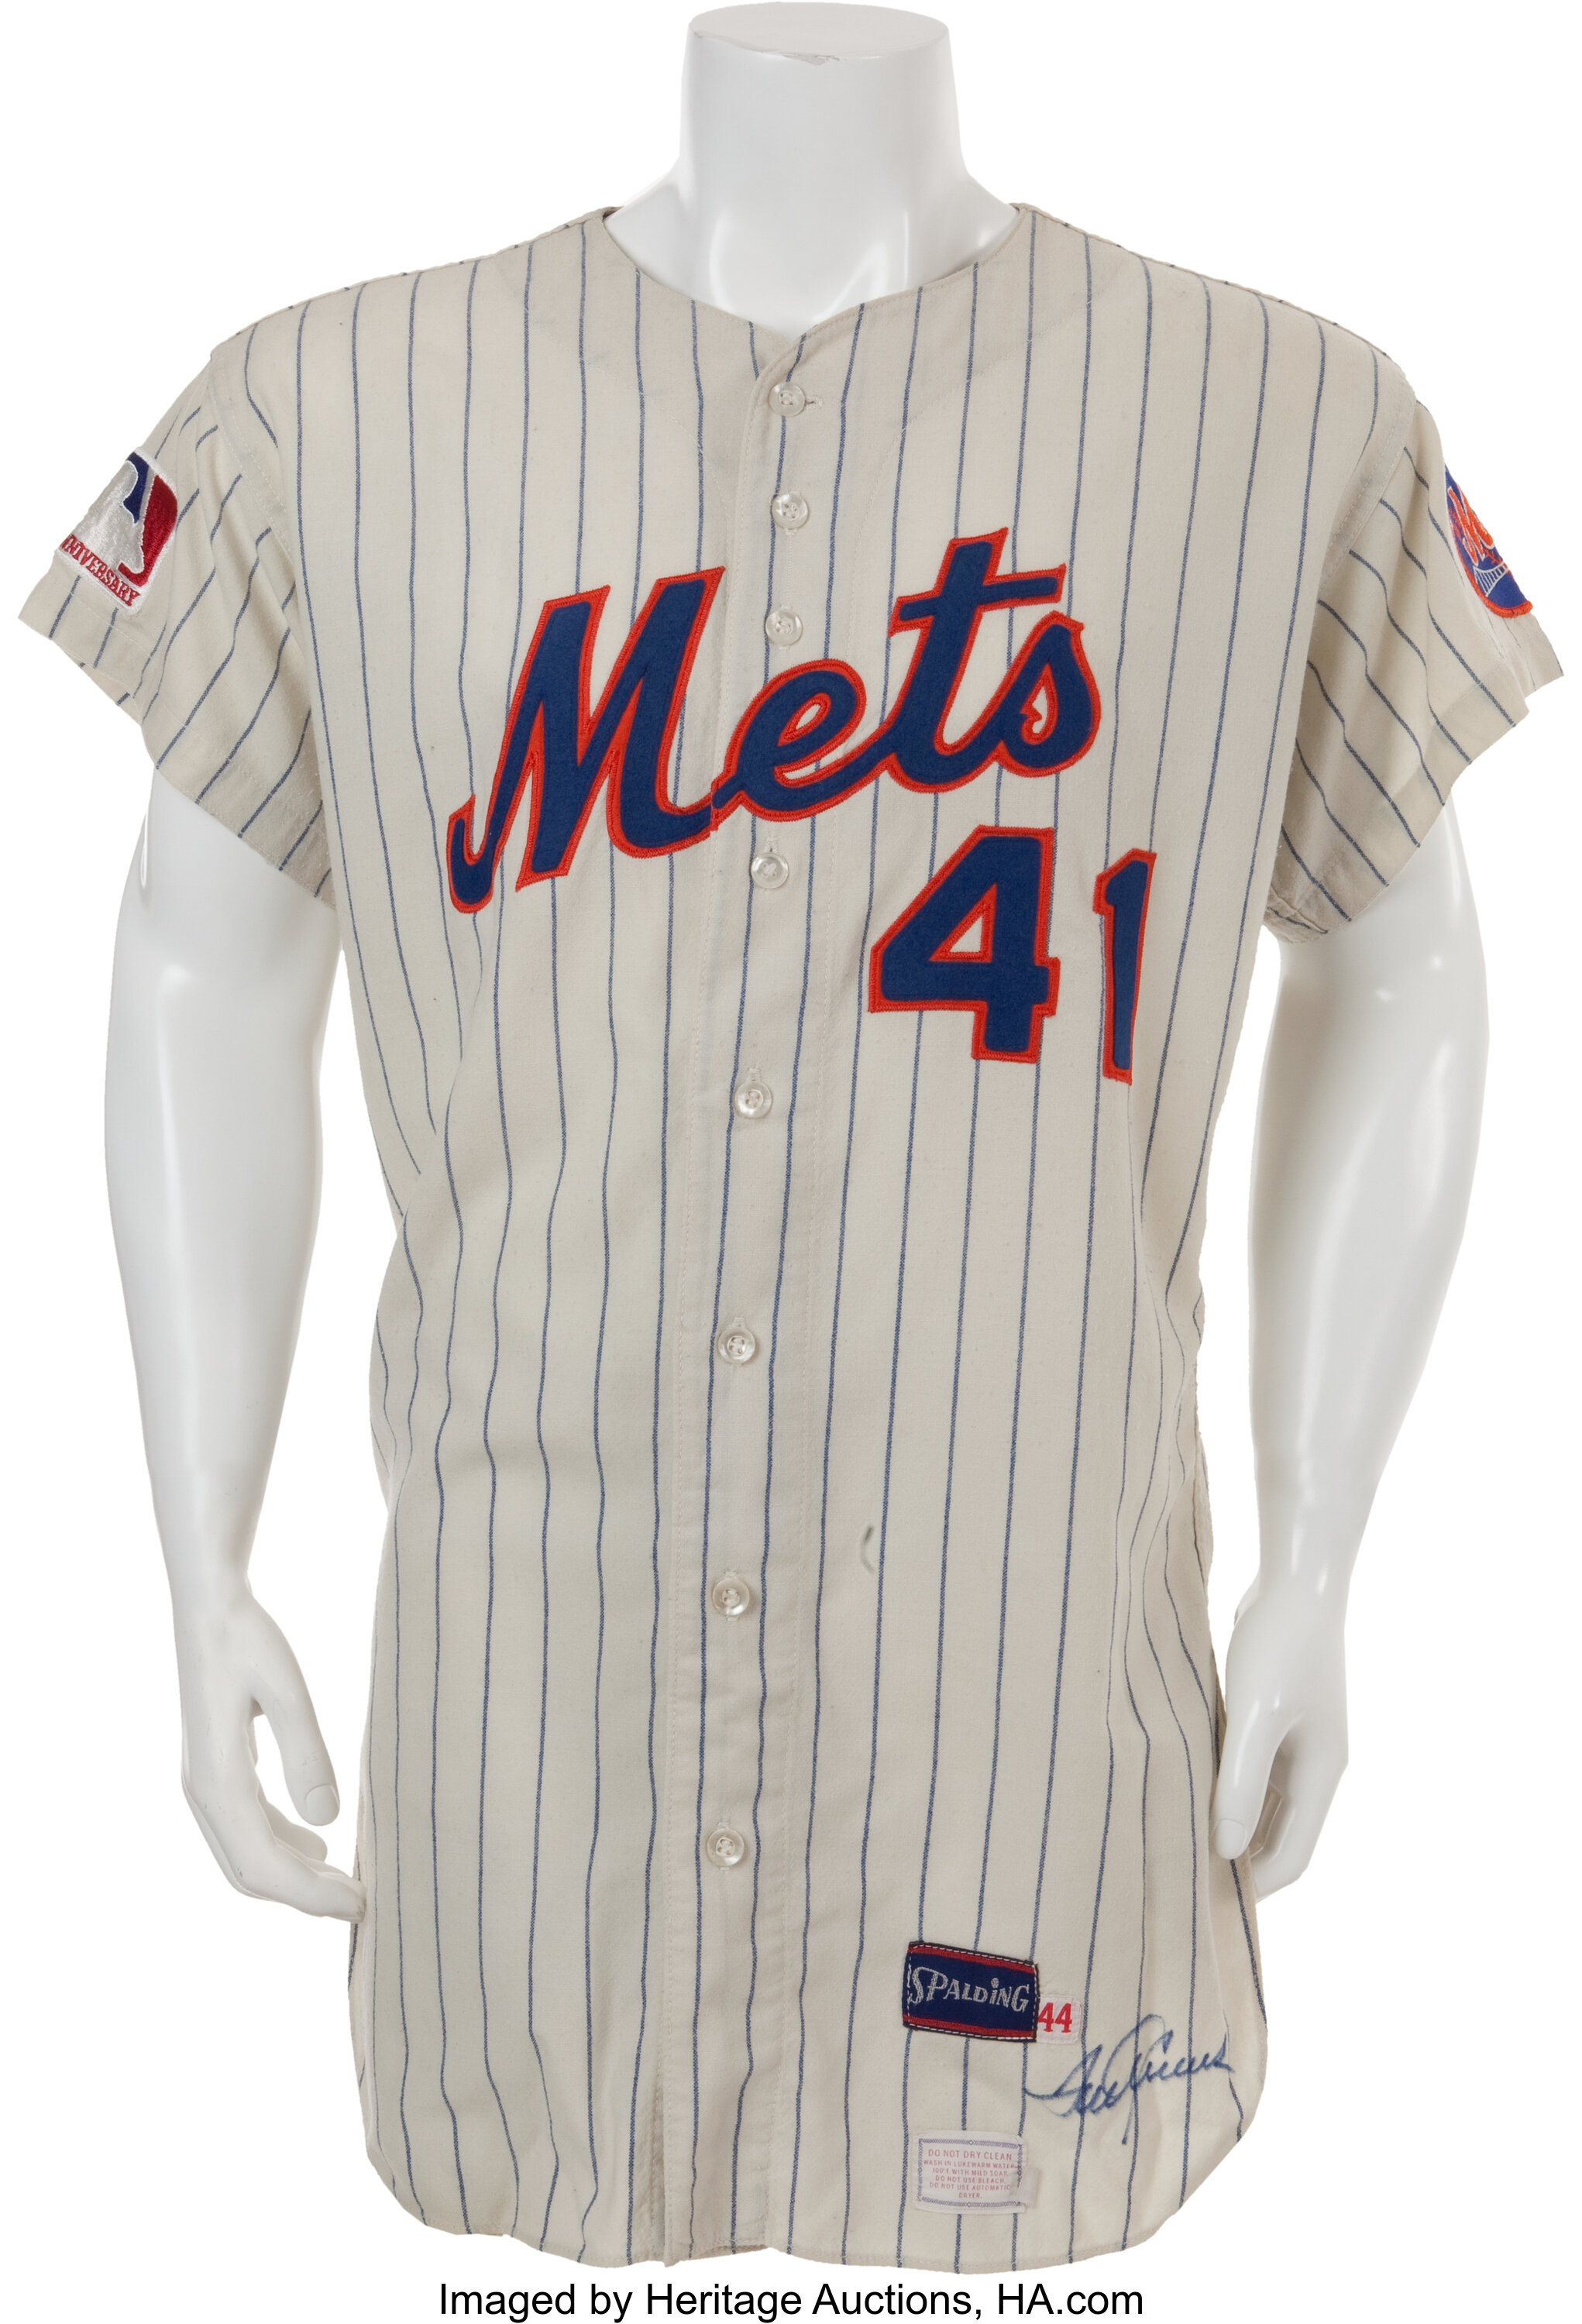 New York Mets 1969 World Series Champions Patch